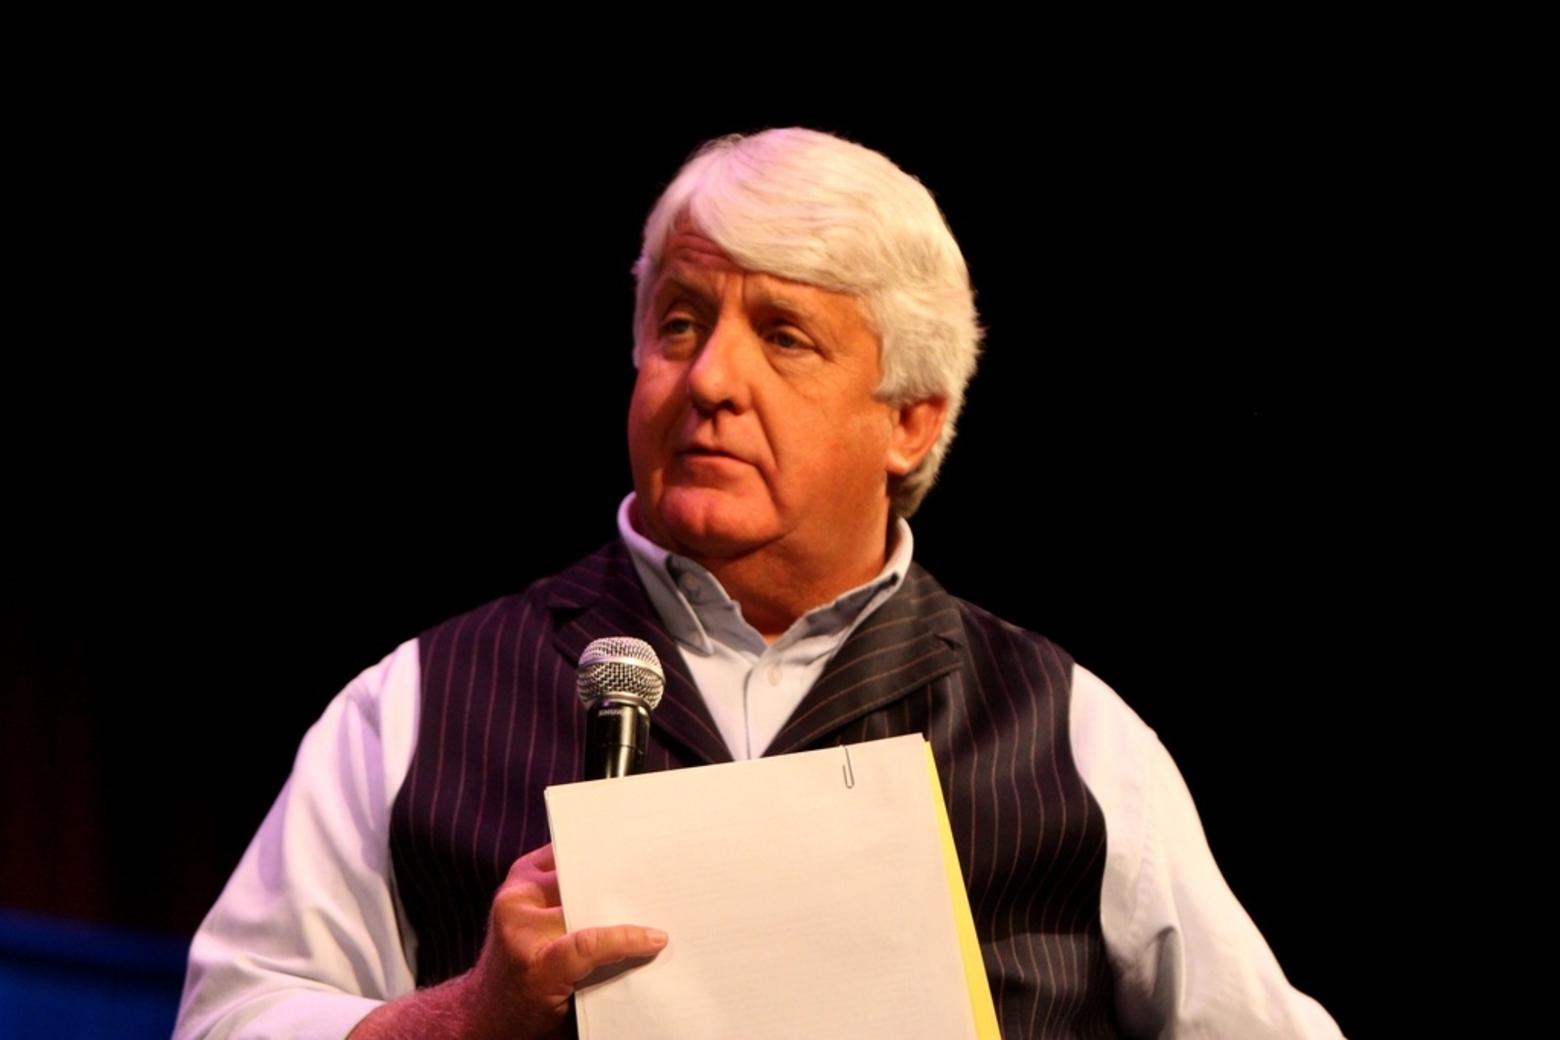 U.S. Rep. Rob Bishop of Utah chairs the House Natural Resources Committee which wields enormous influence in shaping environmental policy and public land management in the American West. Photo courtesy Gage Skidmore via Flickr